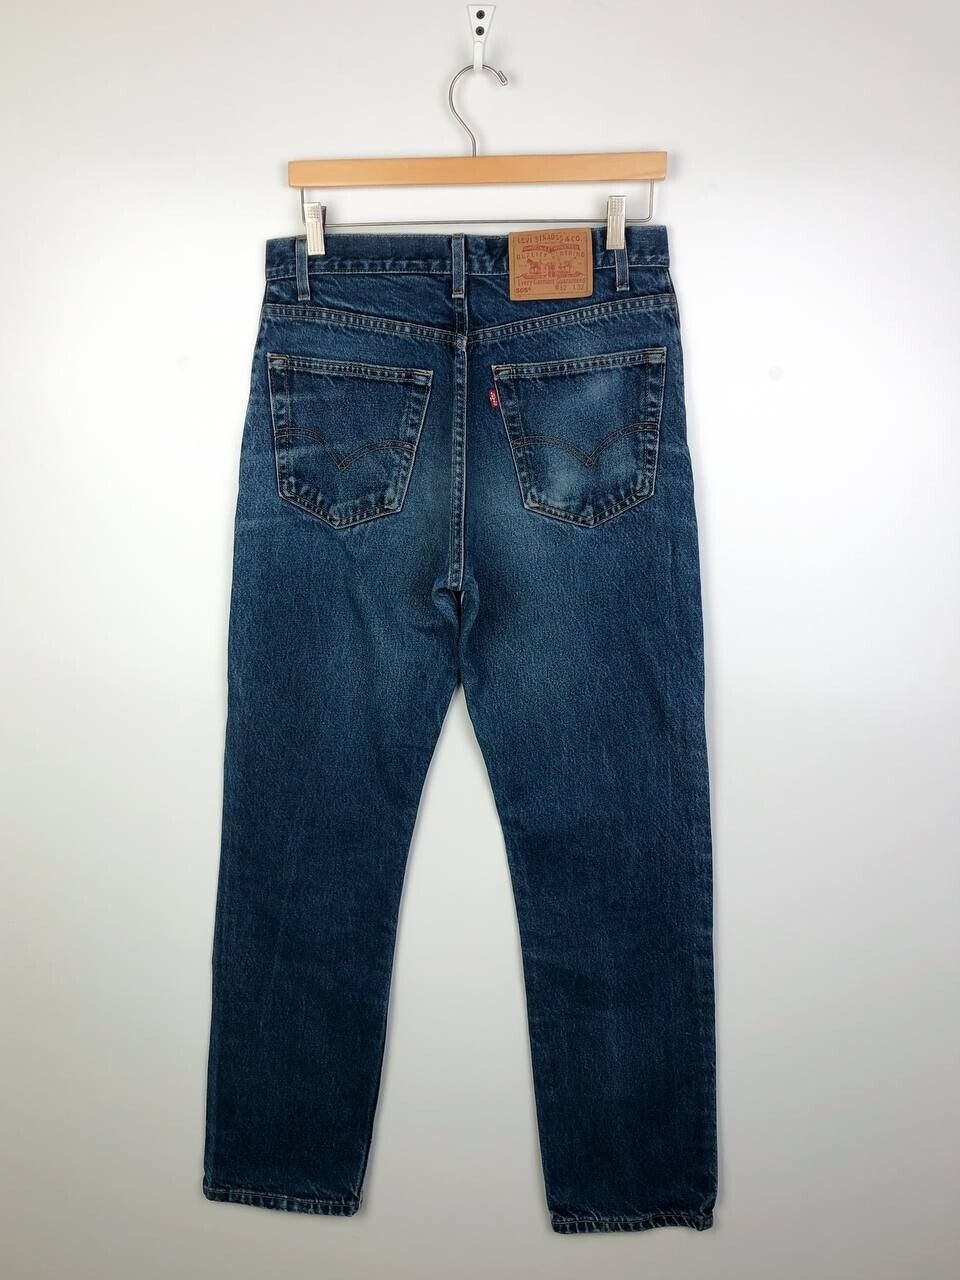 Vintage Levi’s 505 Made in USA MENS w32 l32 505-0… - image 1